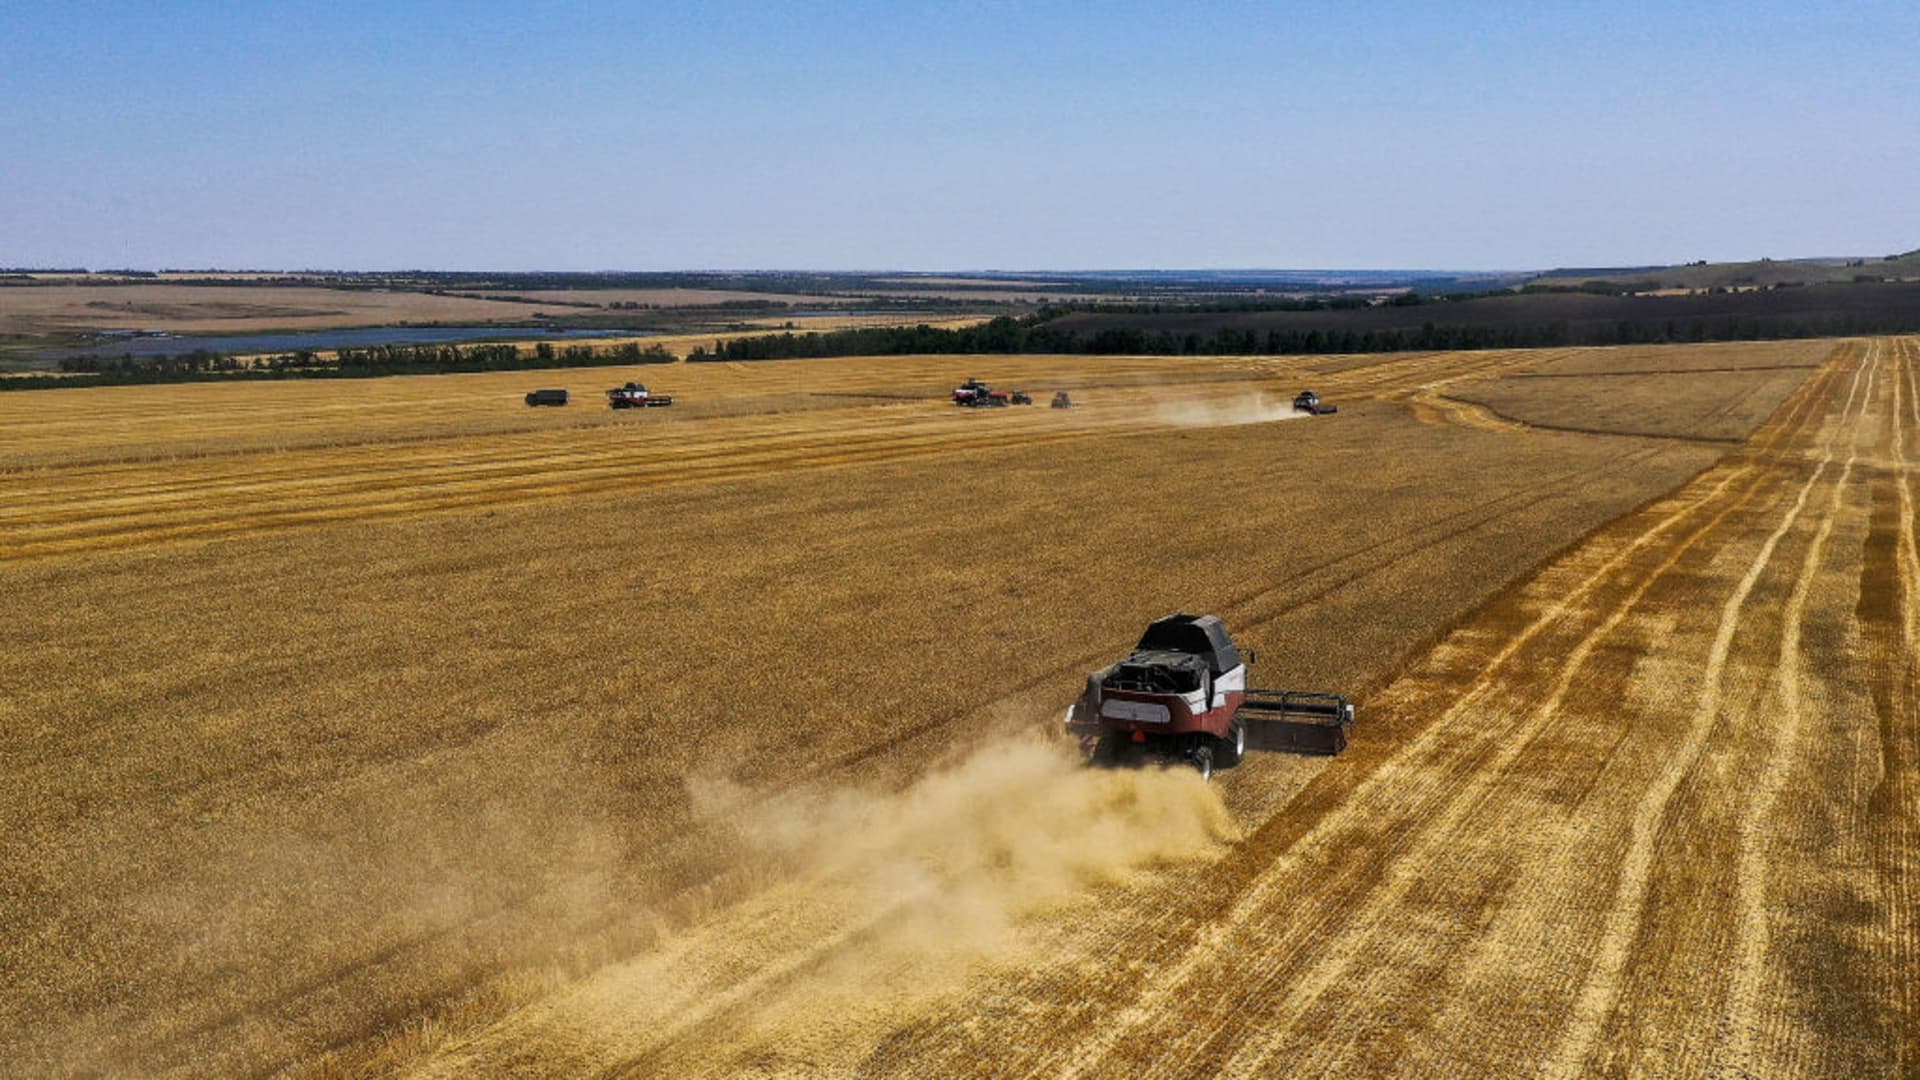 Wheat prices surge after Russia axes grain deal. And it's not good news for the world's food supply